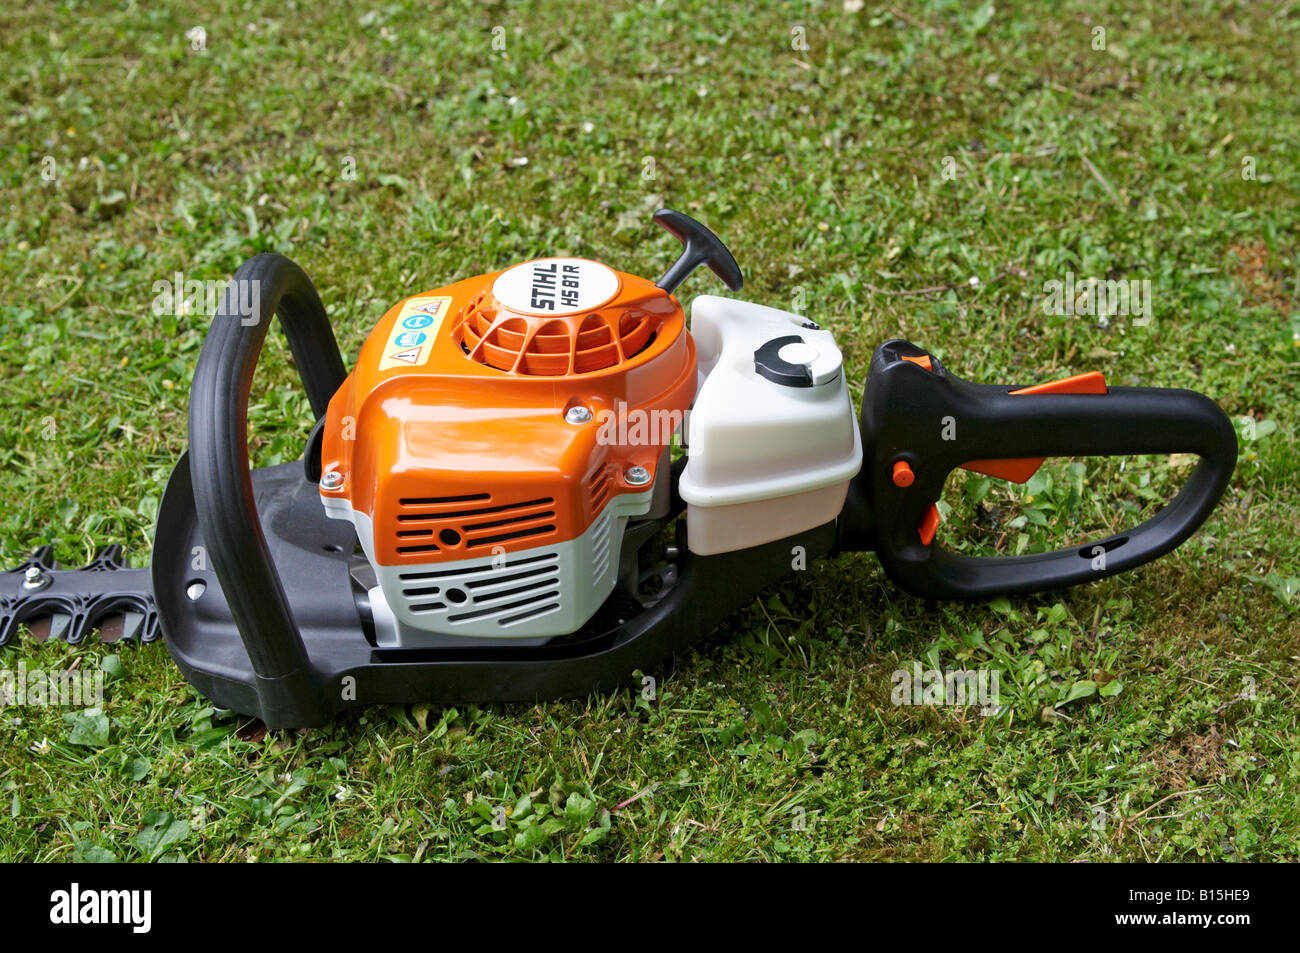 Stihl Hs 81 Hedge Trimmer Hotsell - anuariocidob.org 1689019104